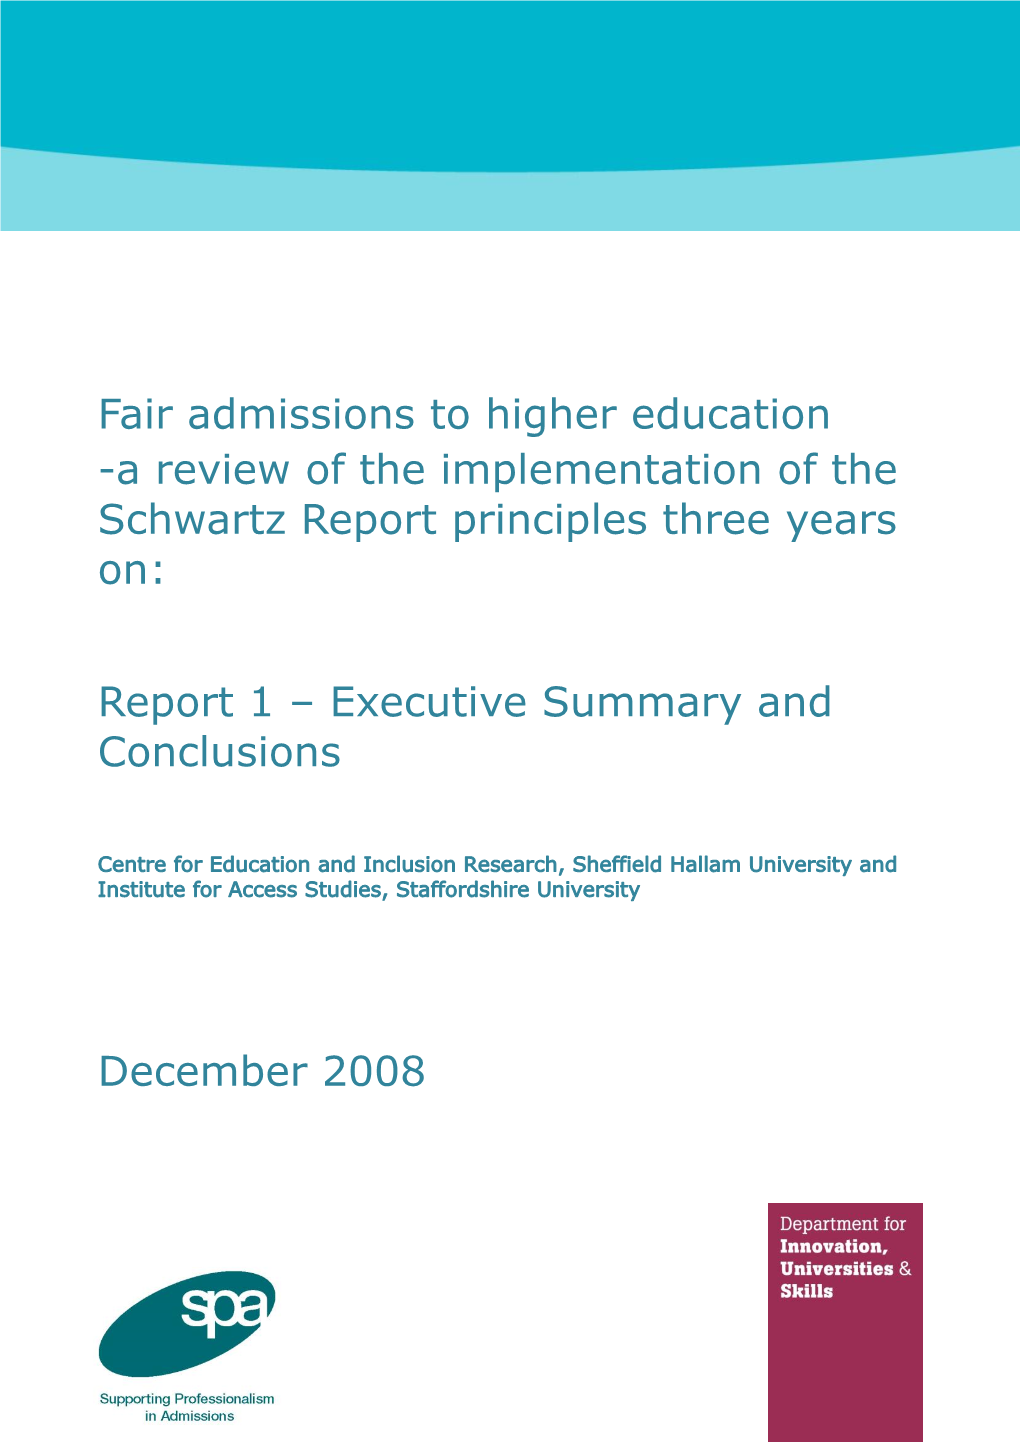 A Review of the Implementation of the Schwartz Report Principles Three Years On